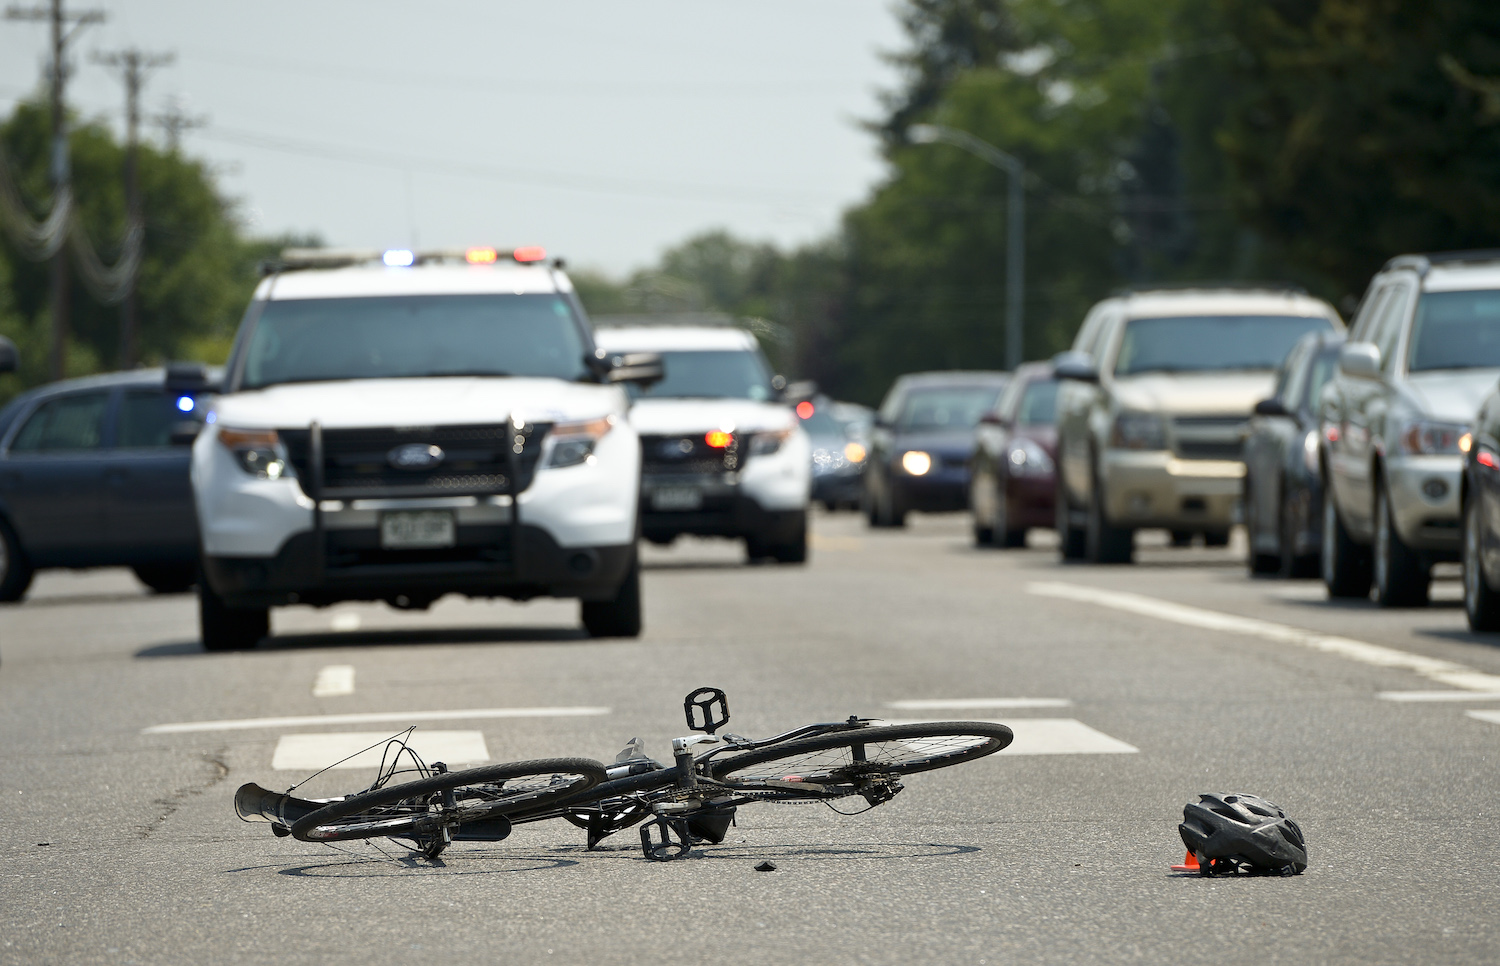 A smashed bicycle on the pavement, surrounded by police cruisers, after a crash with a pickup truck.